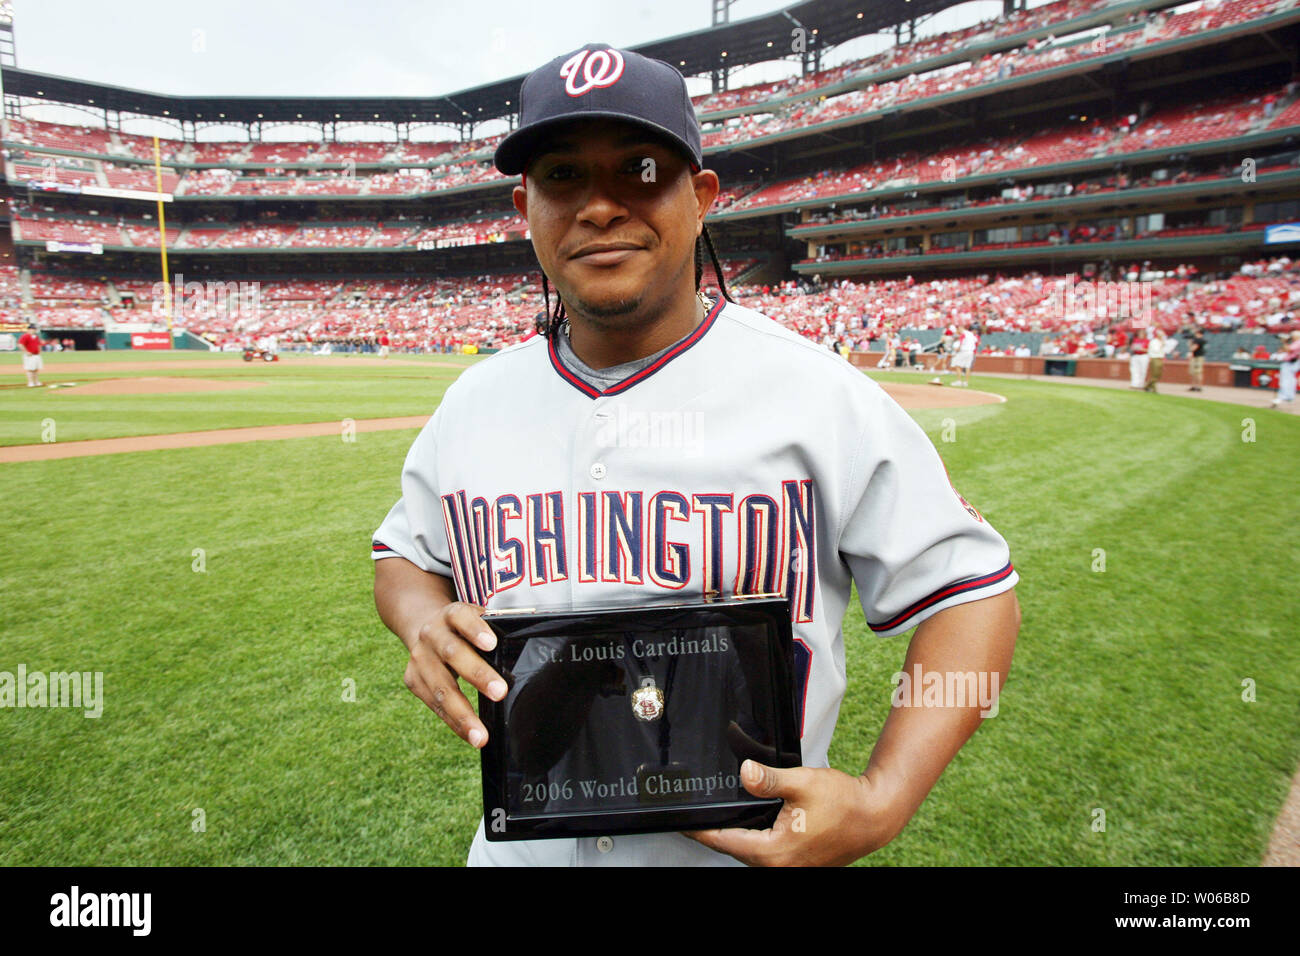 Washington Nationals Ronnie Belliard shows off his World Series  Championship ring as he walks back to the dugout before a game against the  St. Louis Cardinals at Busch Stadium in St. Louis